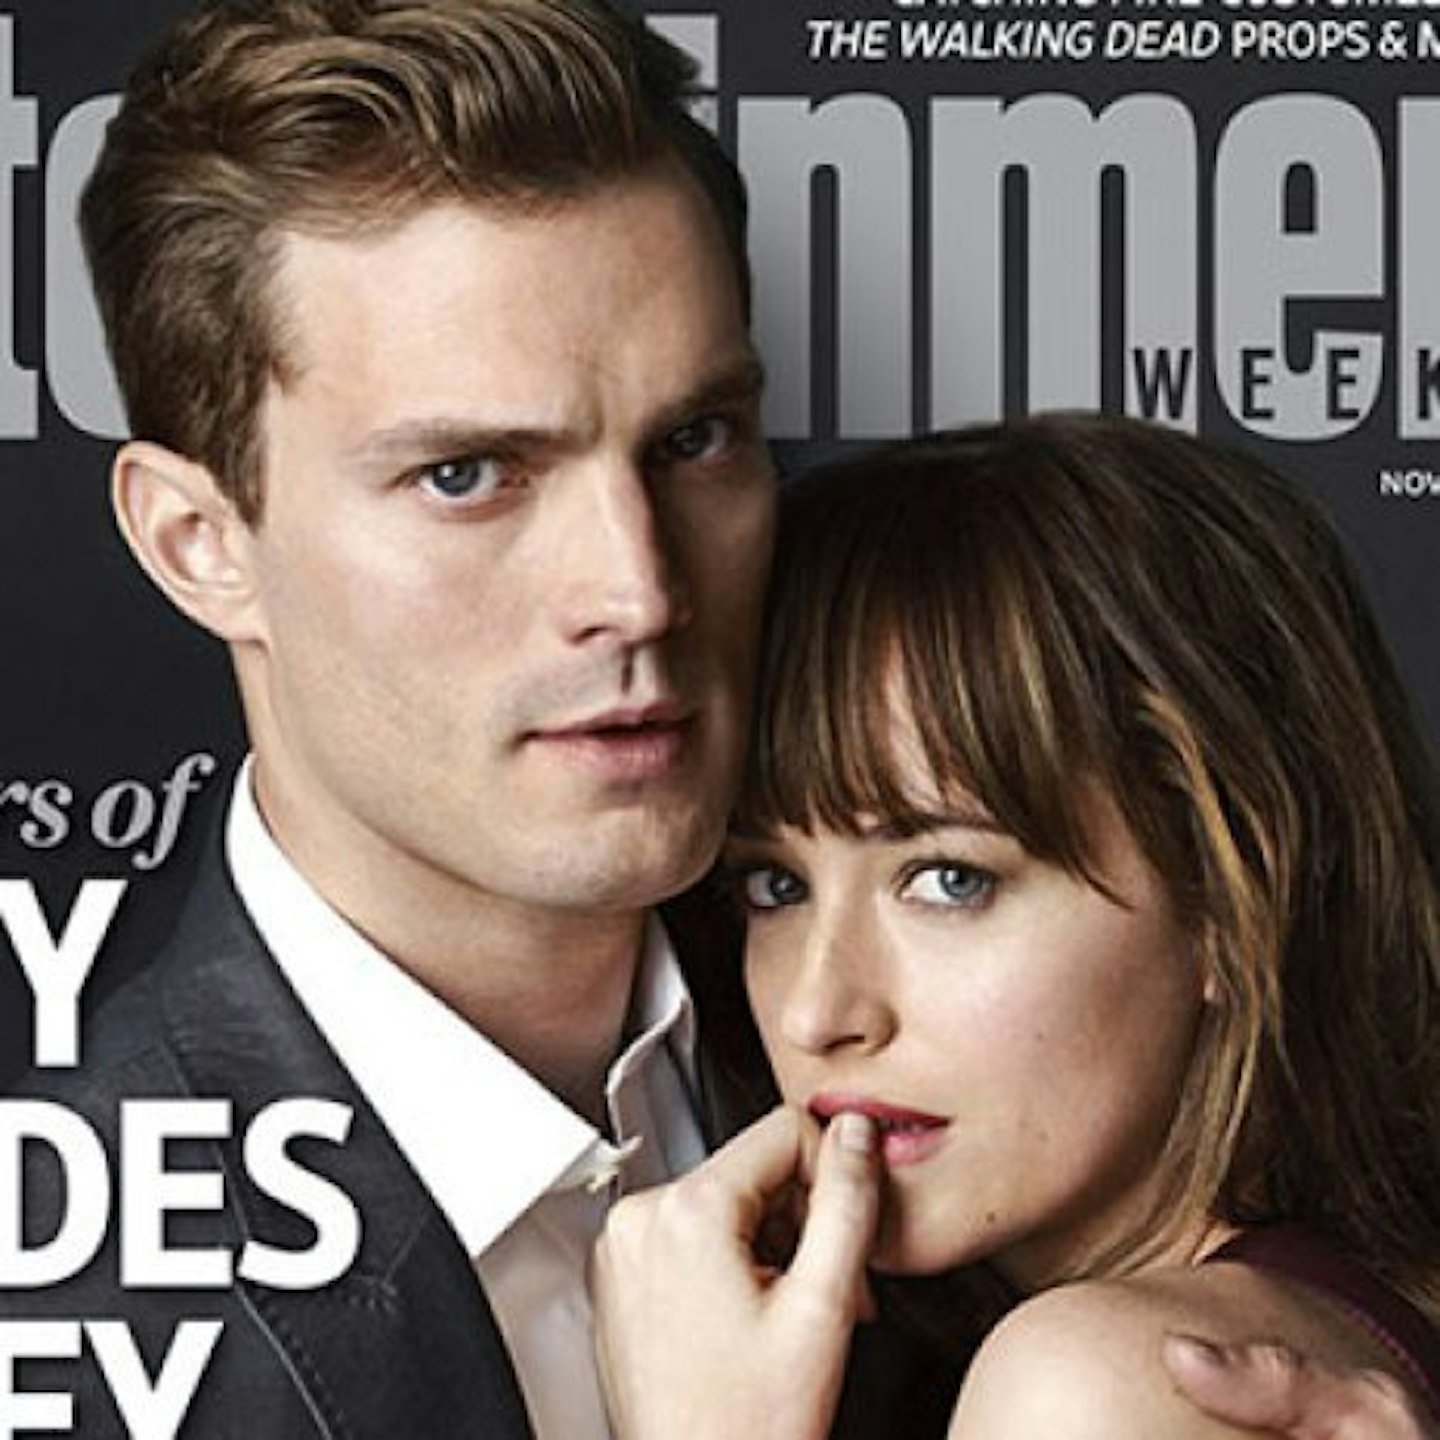 It's your very own Christian and Ana, Fifty Shades fans!